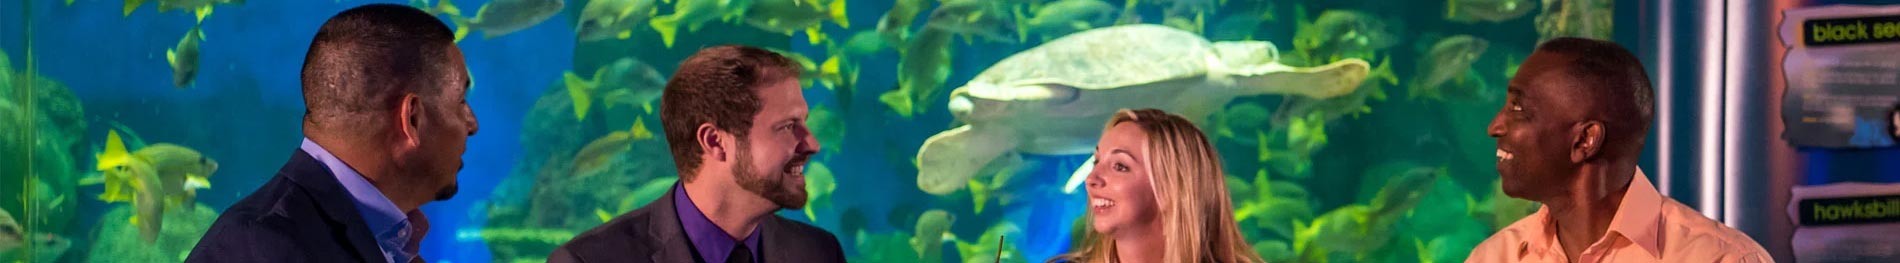 Corporate dinner event at Turtle Reef SeaWorld San Diego